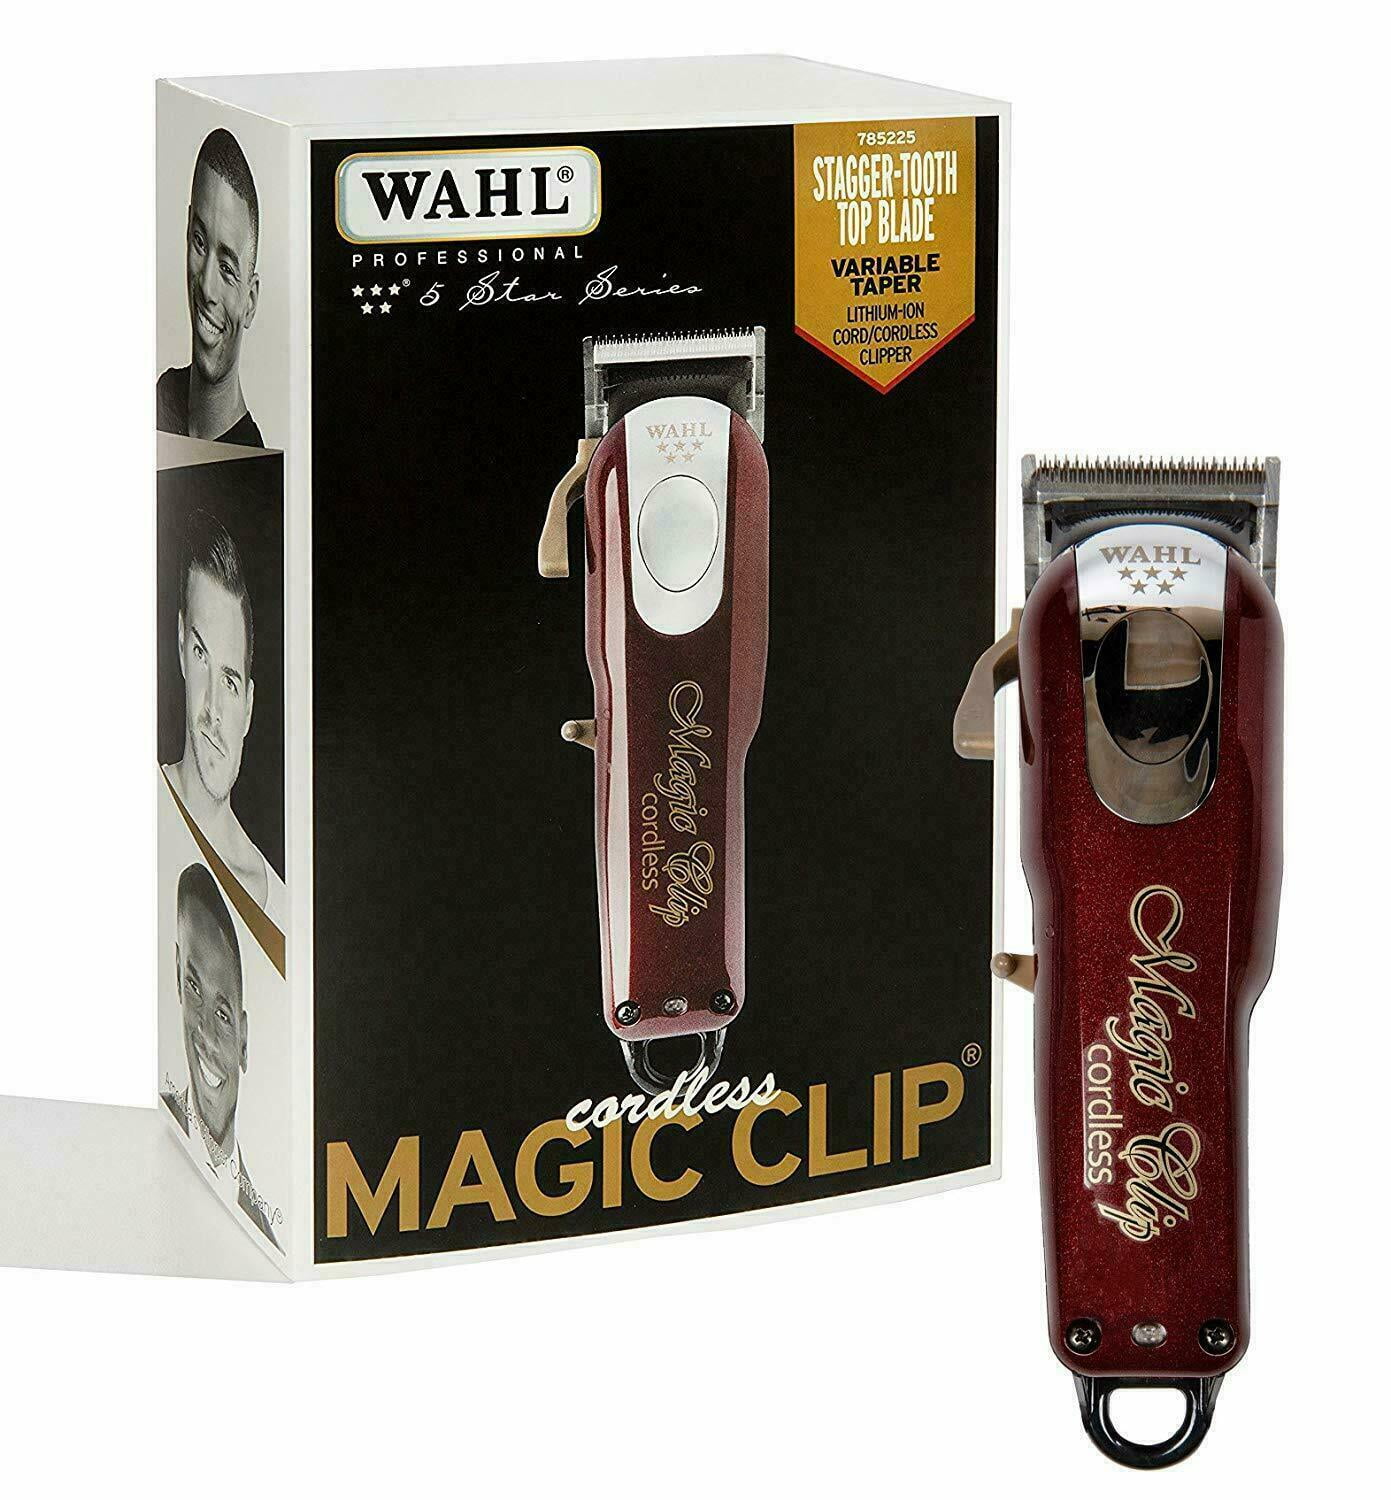 Wahl Professional 5-Star Magic Clip Cord Cordless Hair Clipper #8148 Includes Weighted Cordless Clipper Charging Stand #3801-100 for Pro並行輸入 - 3